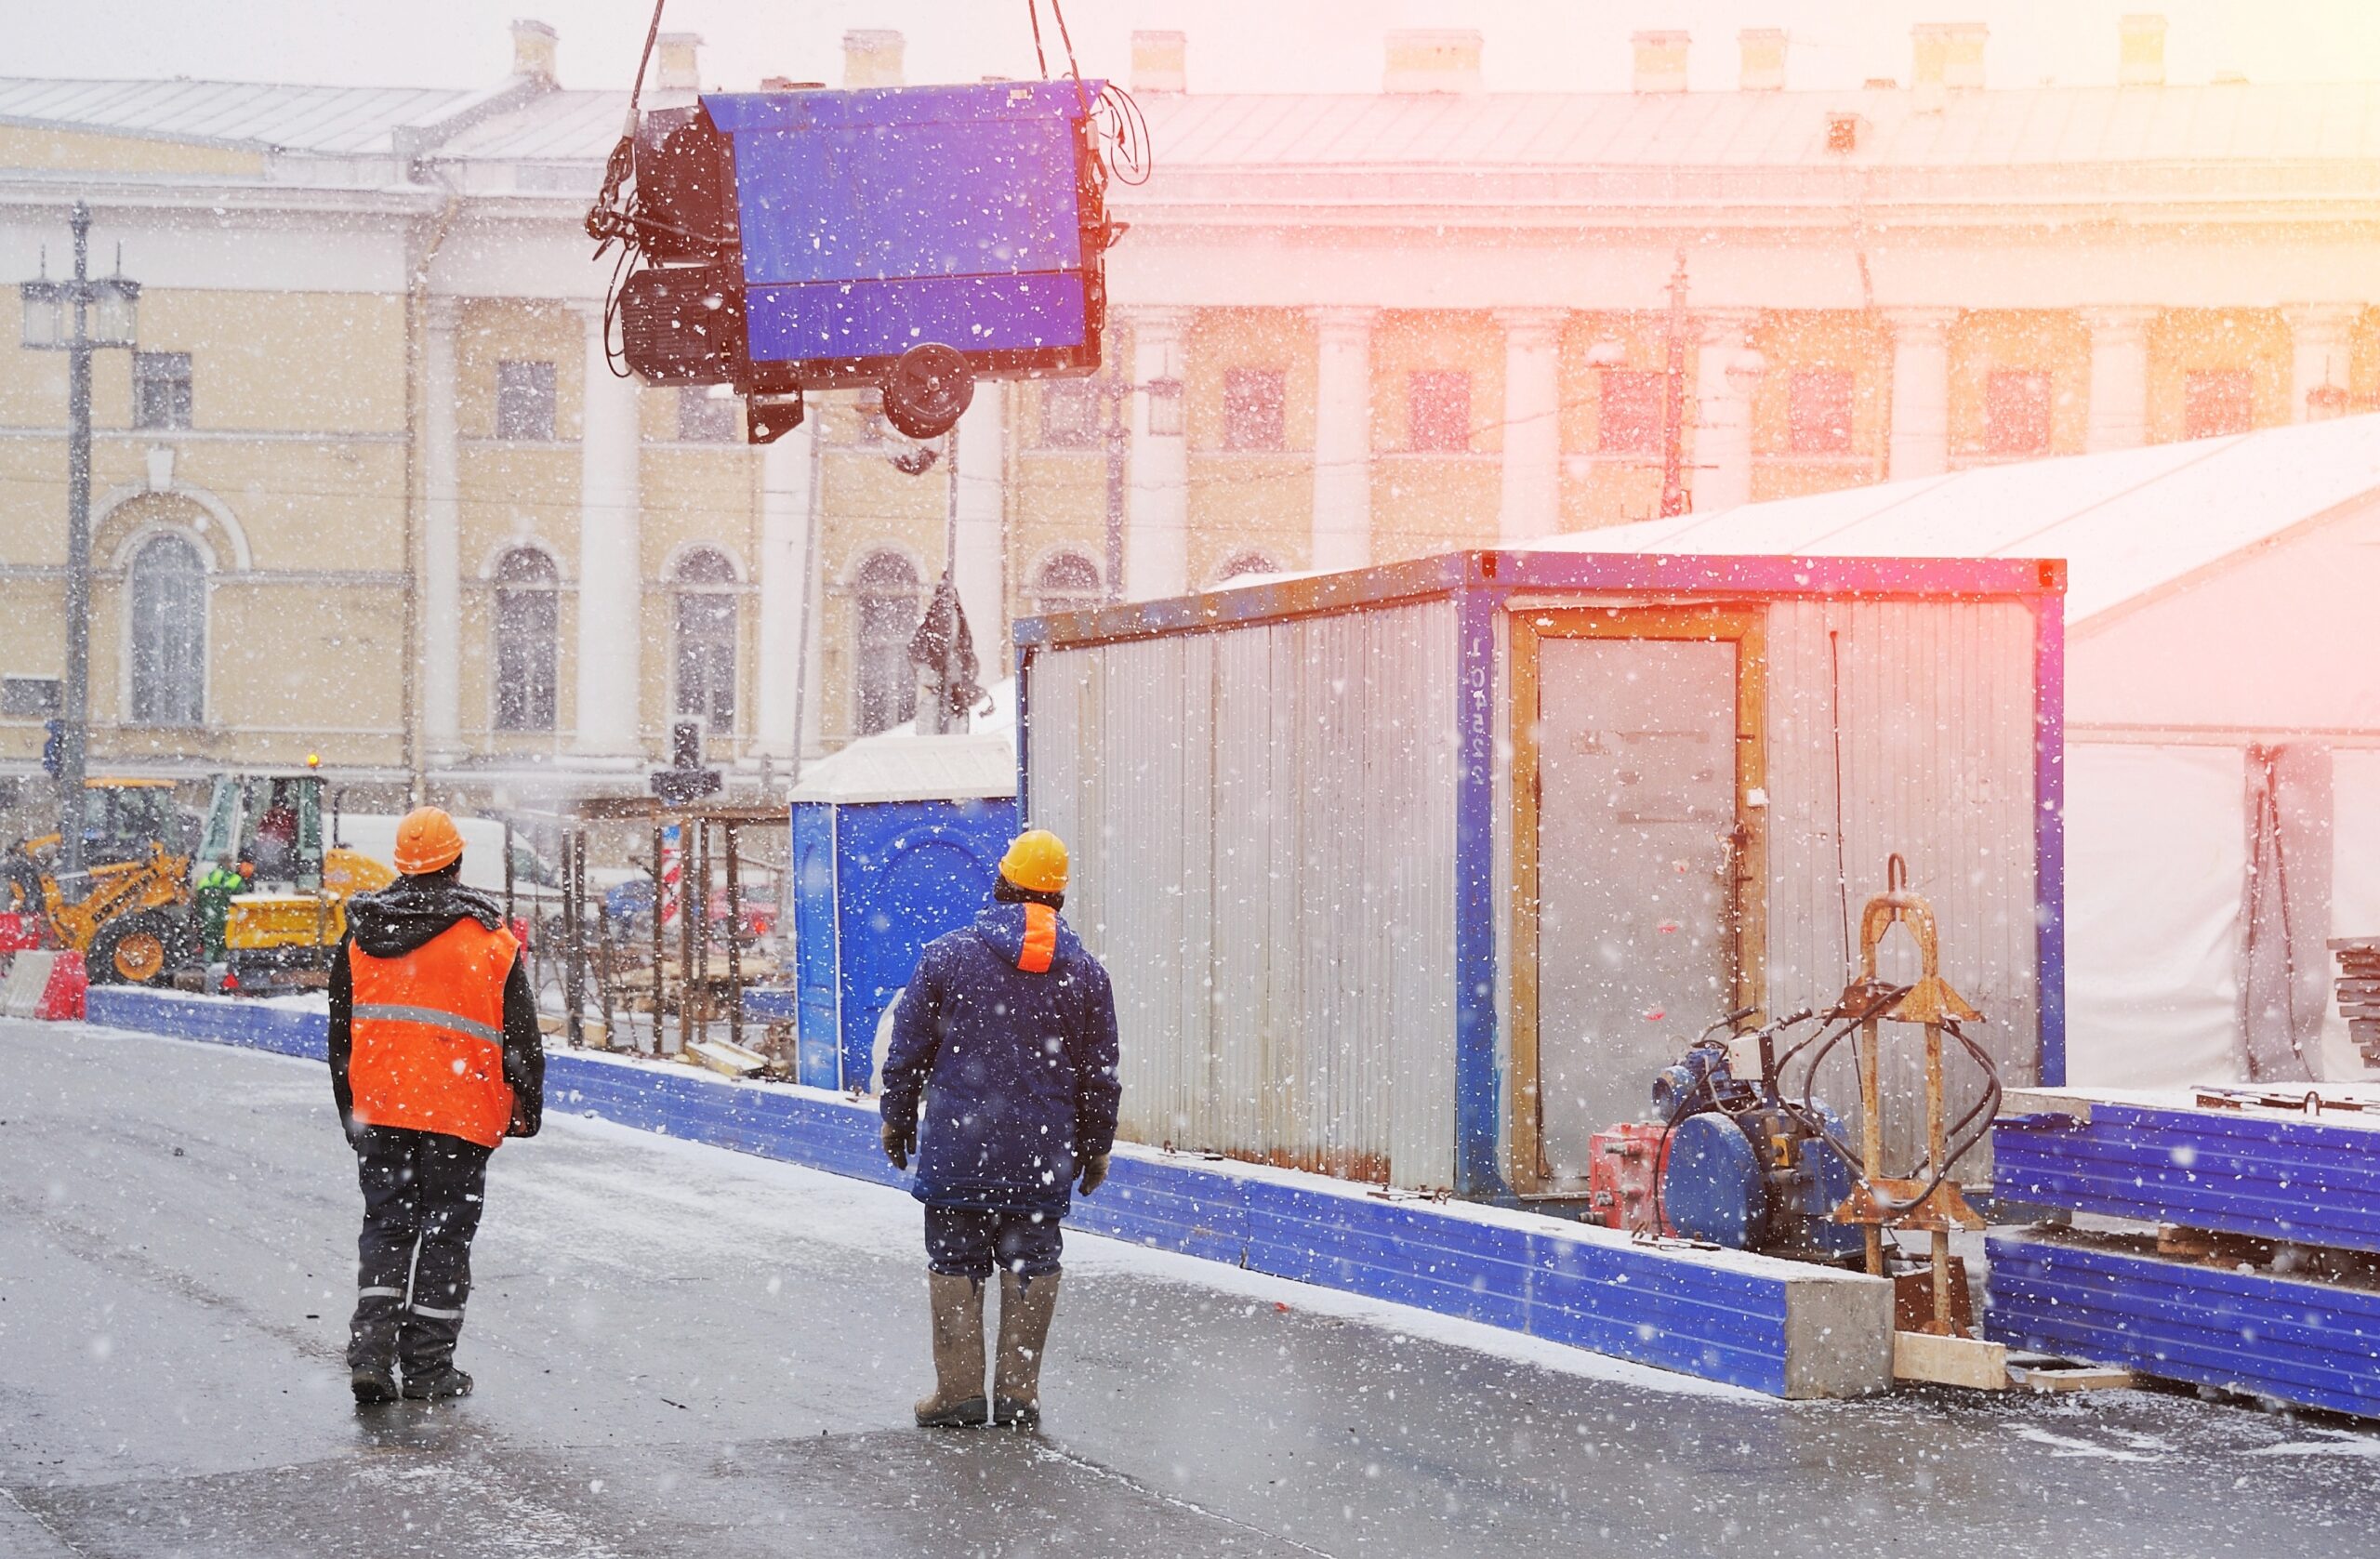 Working Safely in Winter Weather